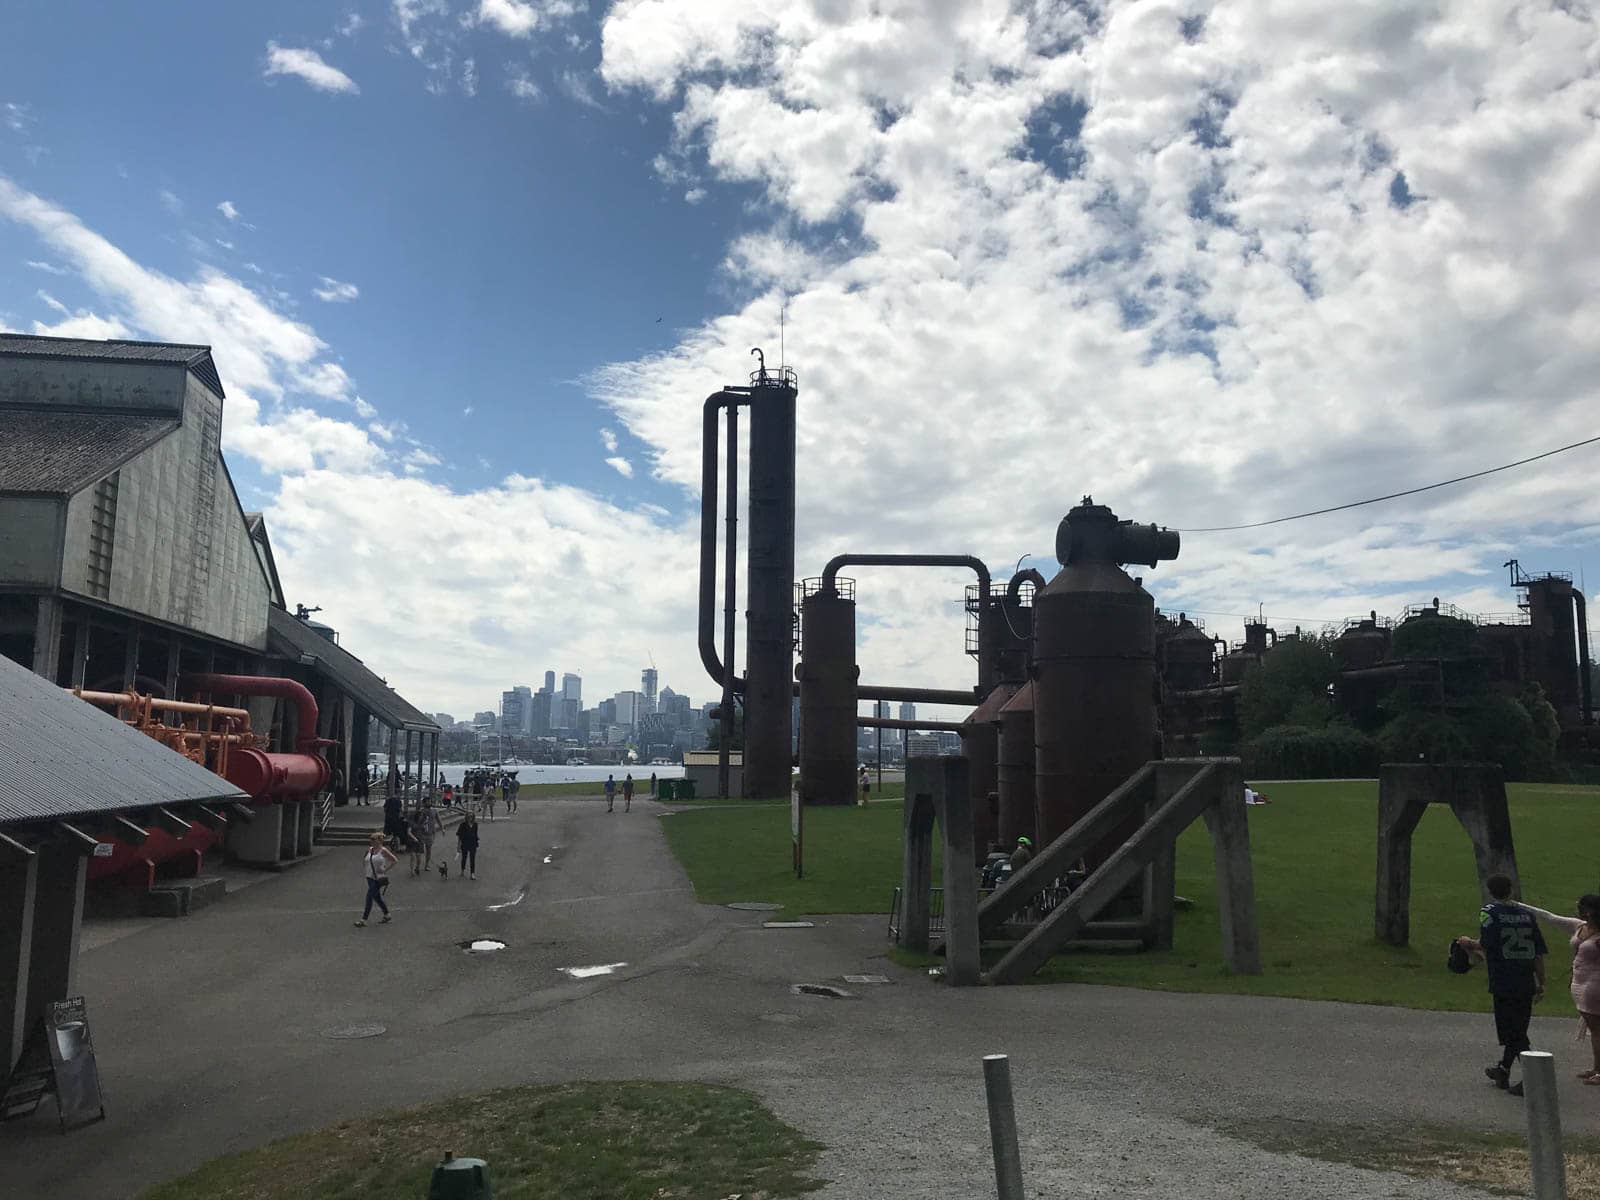 Remnants of a coal plant and some old buildings as part of a park. Way into the distance, the skyline of Seattle can be seen